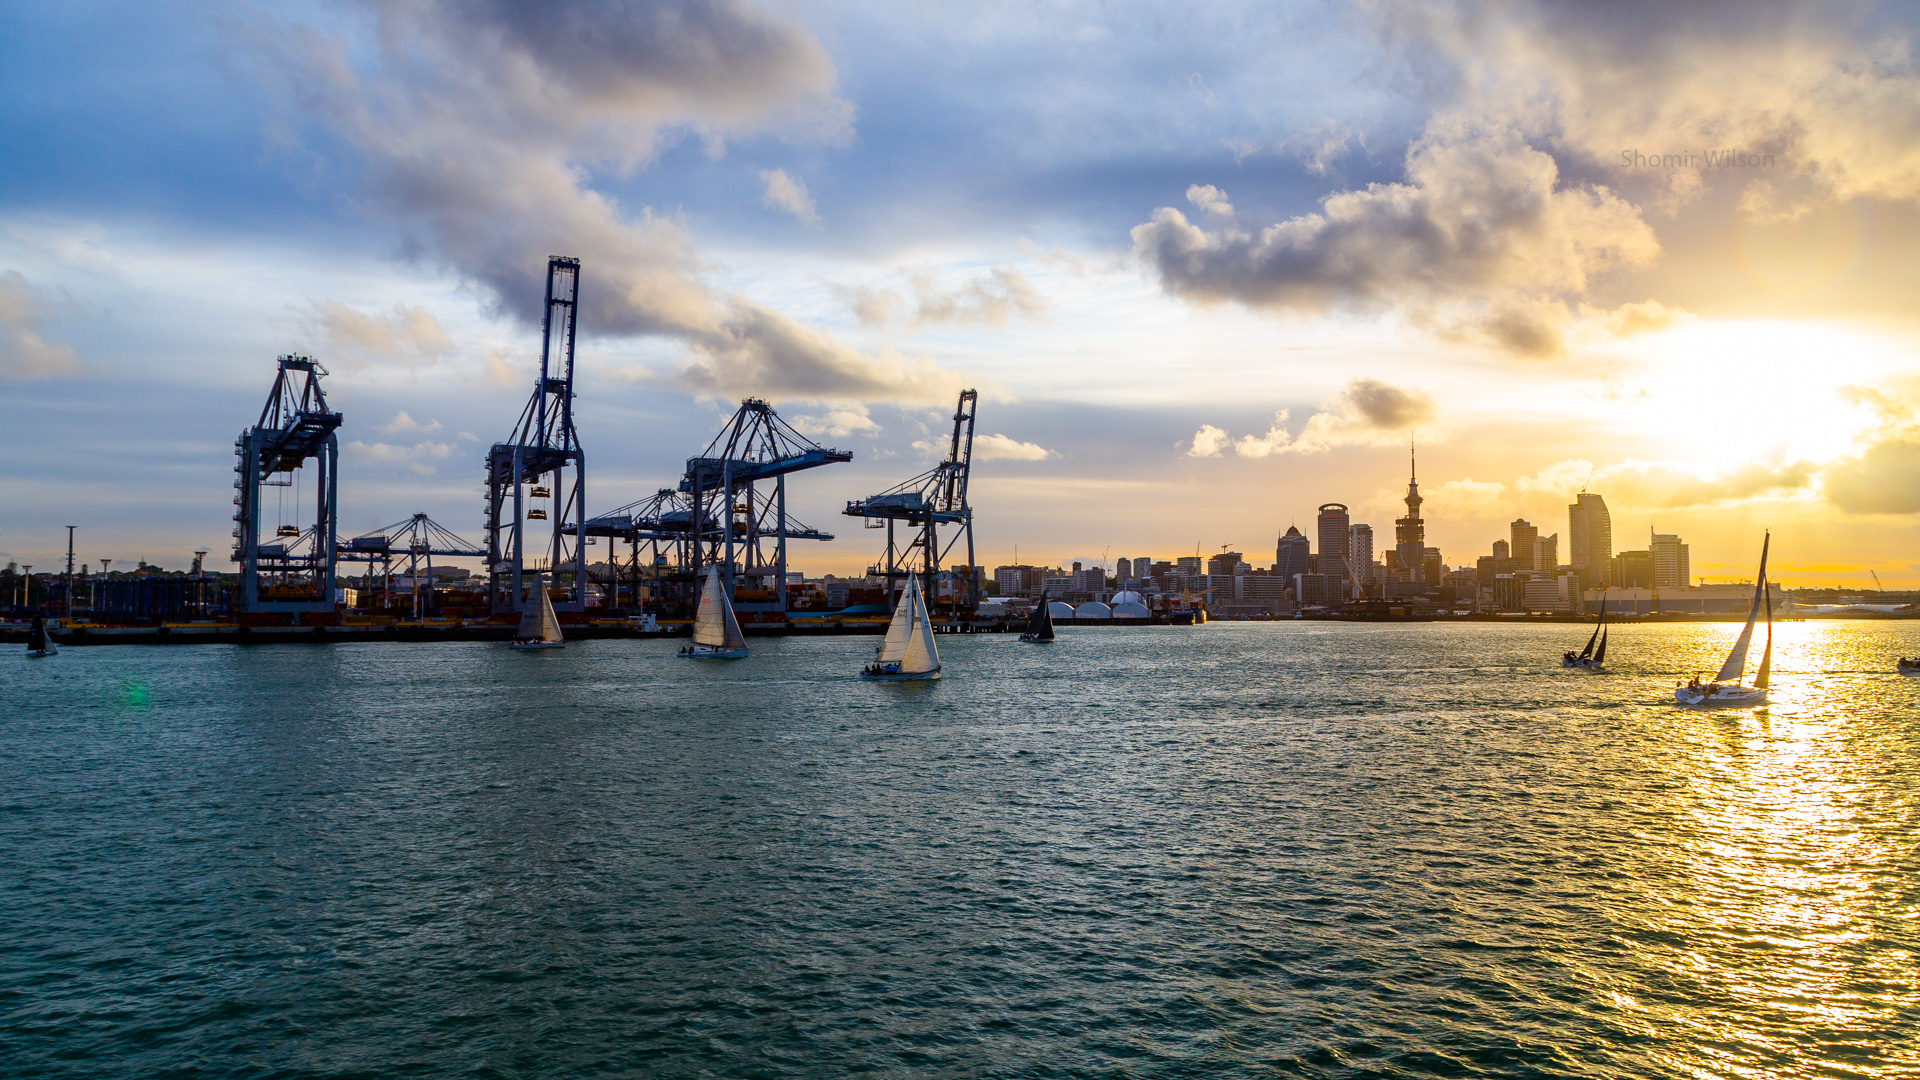 Container port and city skyline with a sunset in the sky